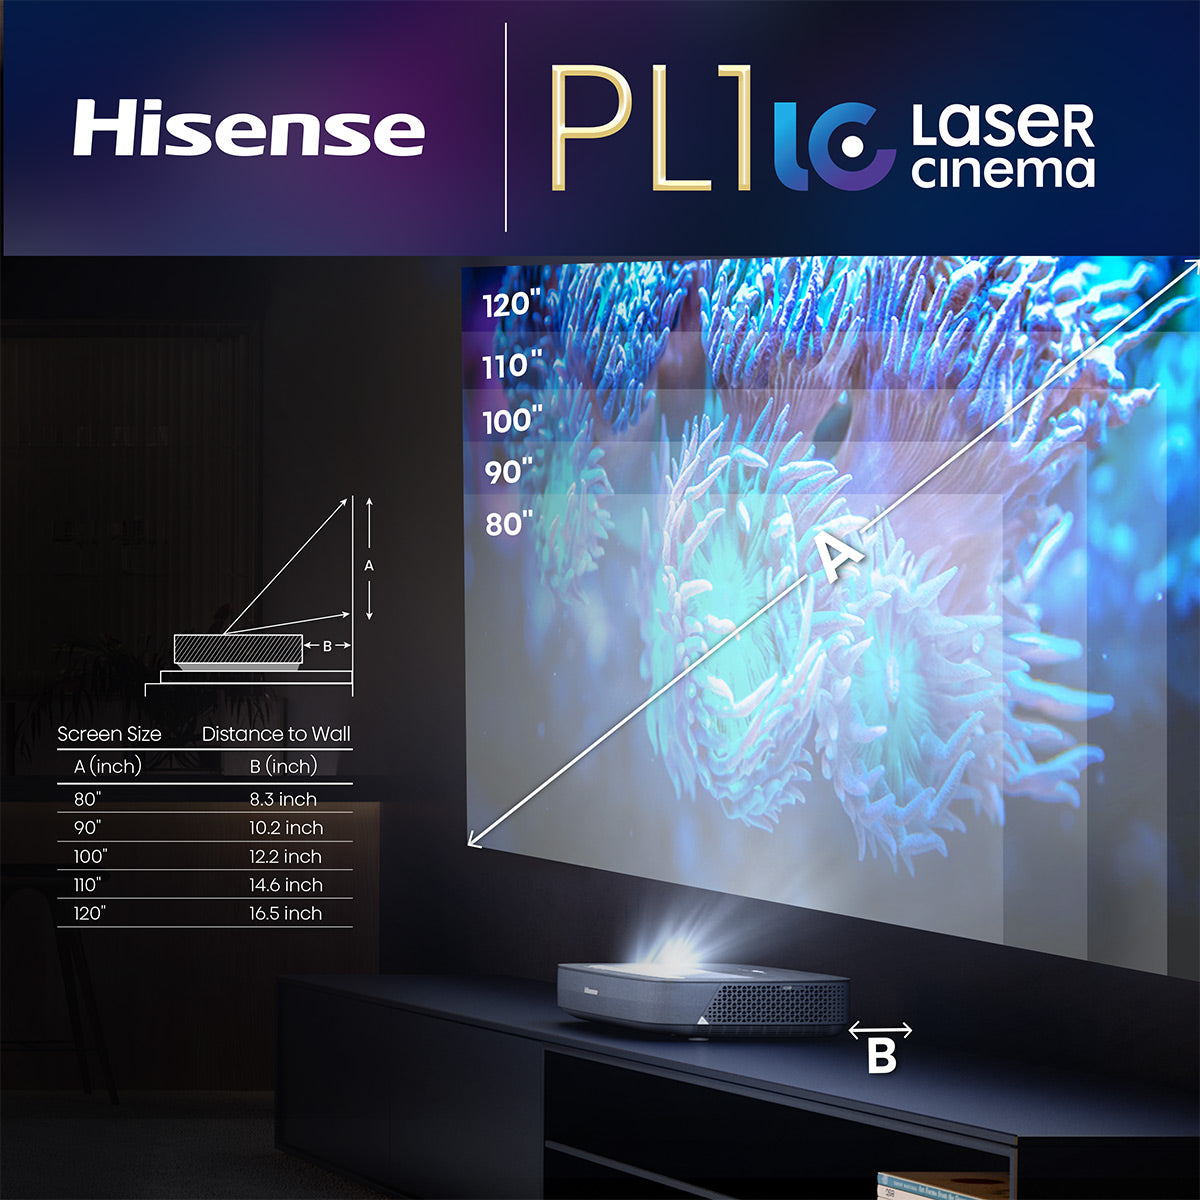 Wide Stereo Vision, Laser Ultra Throw & TV | World Cinema Google with Projector PL1 X-Fusion Dolby Atmos, 4K Short Hisense Dolby